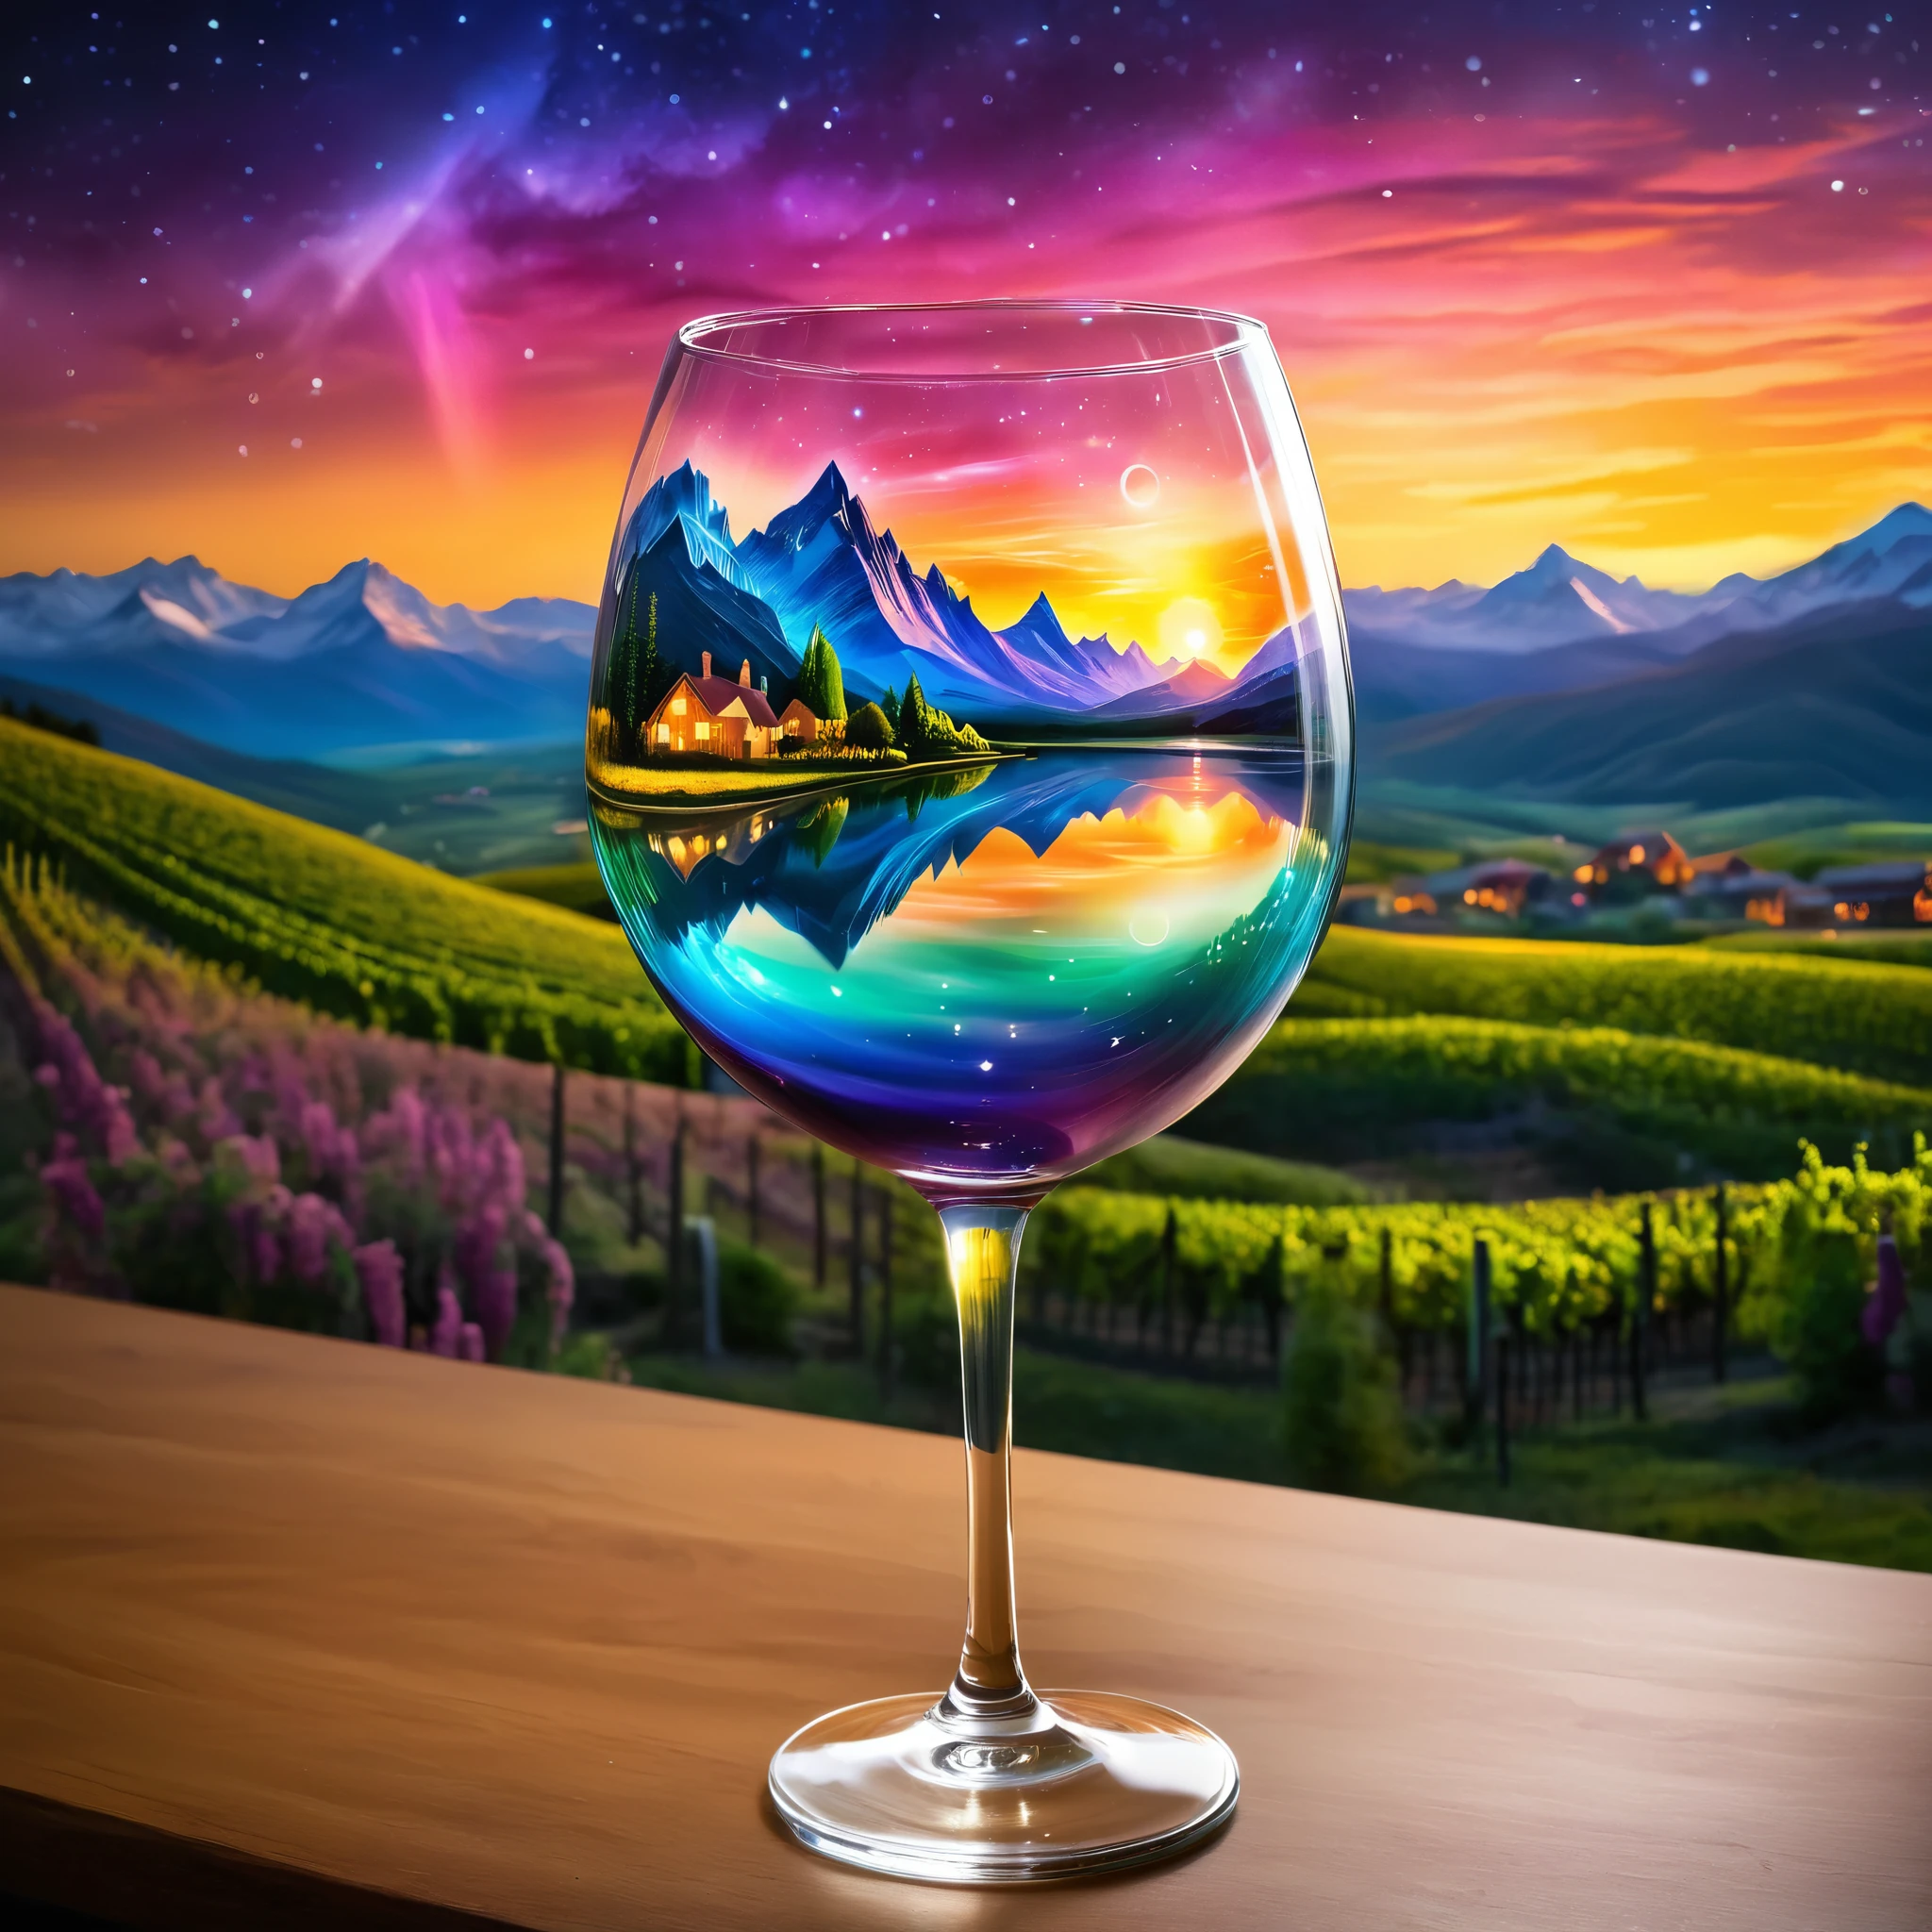 Create a celestial scene within a wine glass, featuring a surreal landscape with mountains and an aurora sky. The background includes a glowing sunset and cityscape. The style should be fantasy with ethereal elements. Hyper realistic photo, super vibrant colors, 16k